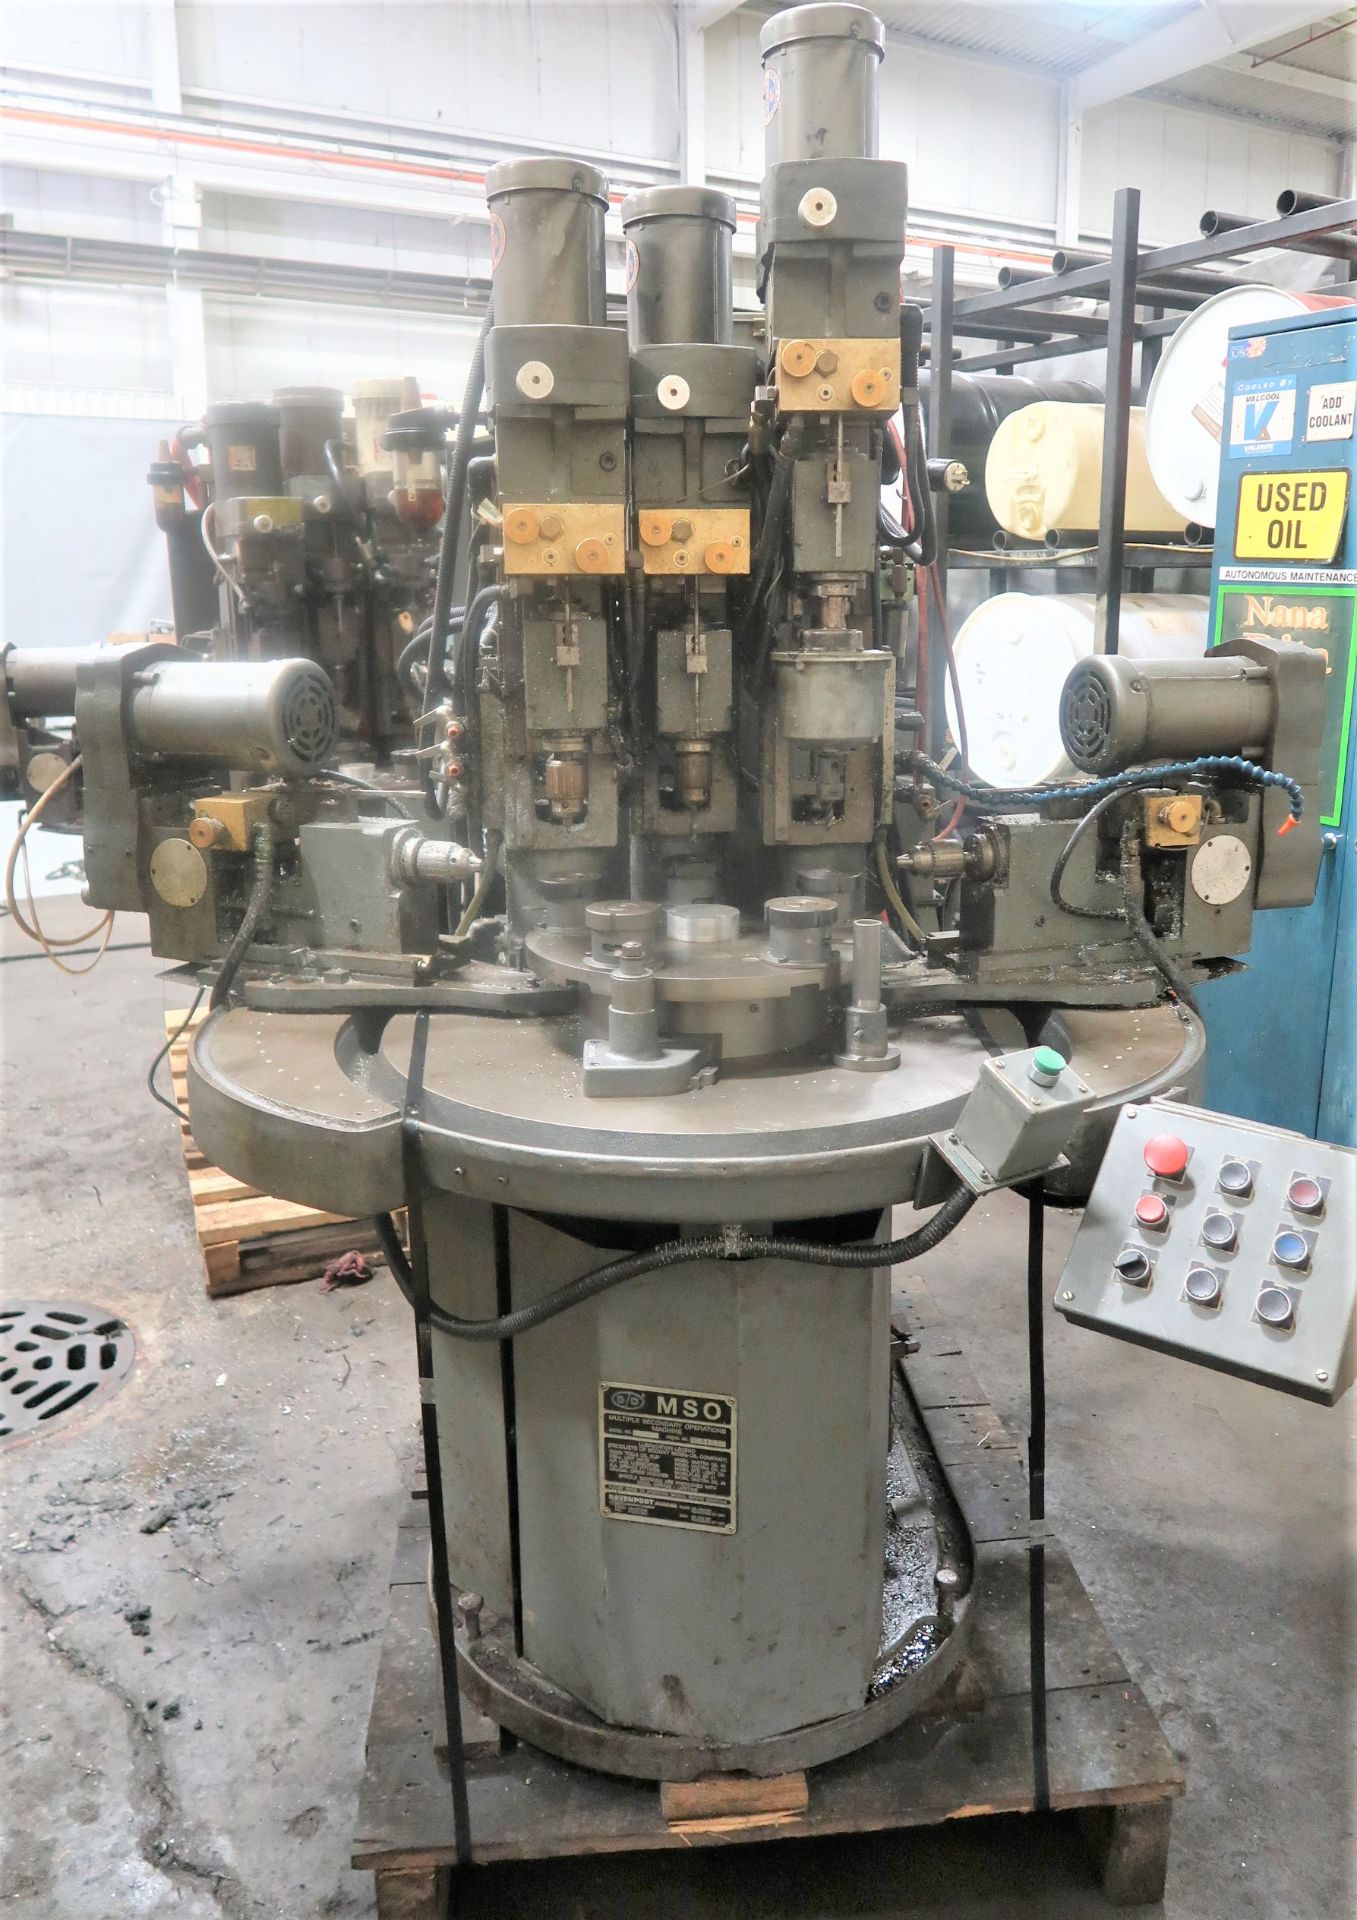 MSO DAVENPORT 5-SPINDLE MULTIPLE SECONDAY OPERATION ROTARY TRANSFER MACHINE, S/N 9531538, NEW 1995